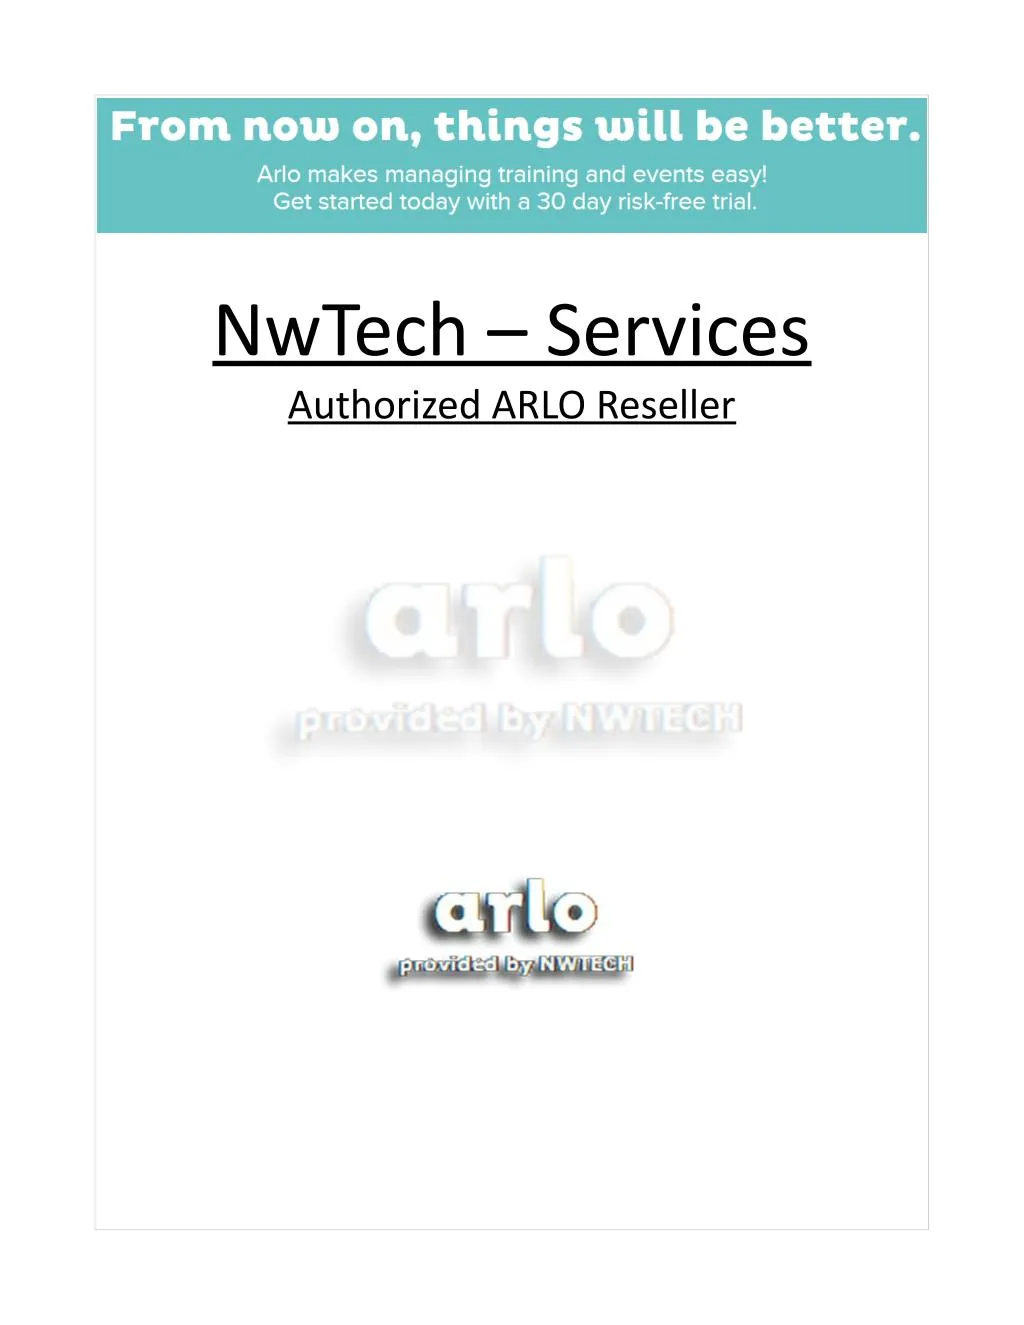 nwtech services authorized arlo reseller